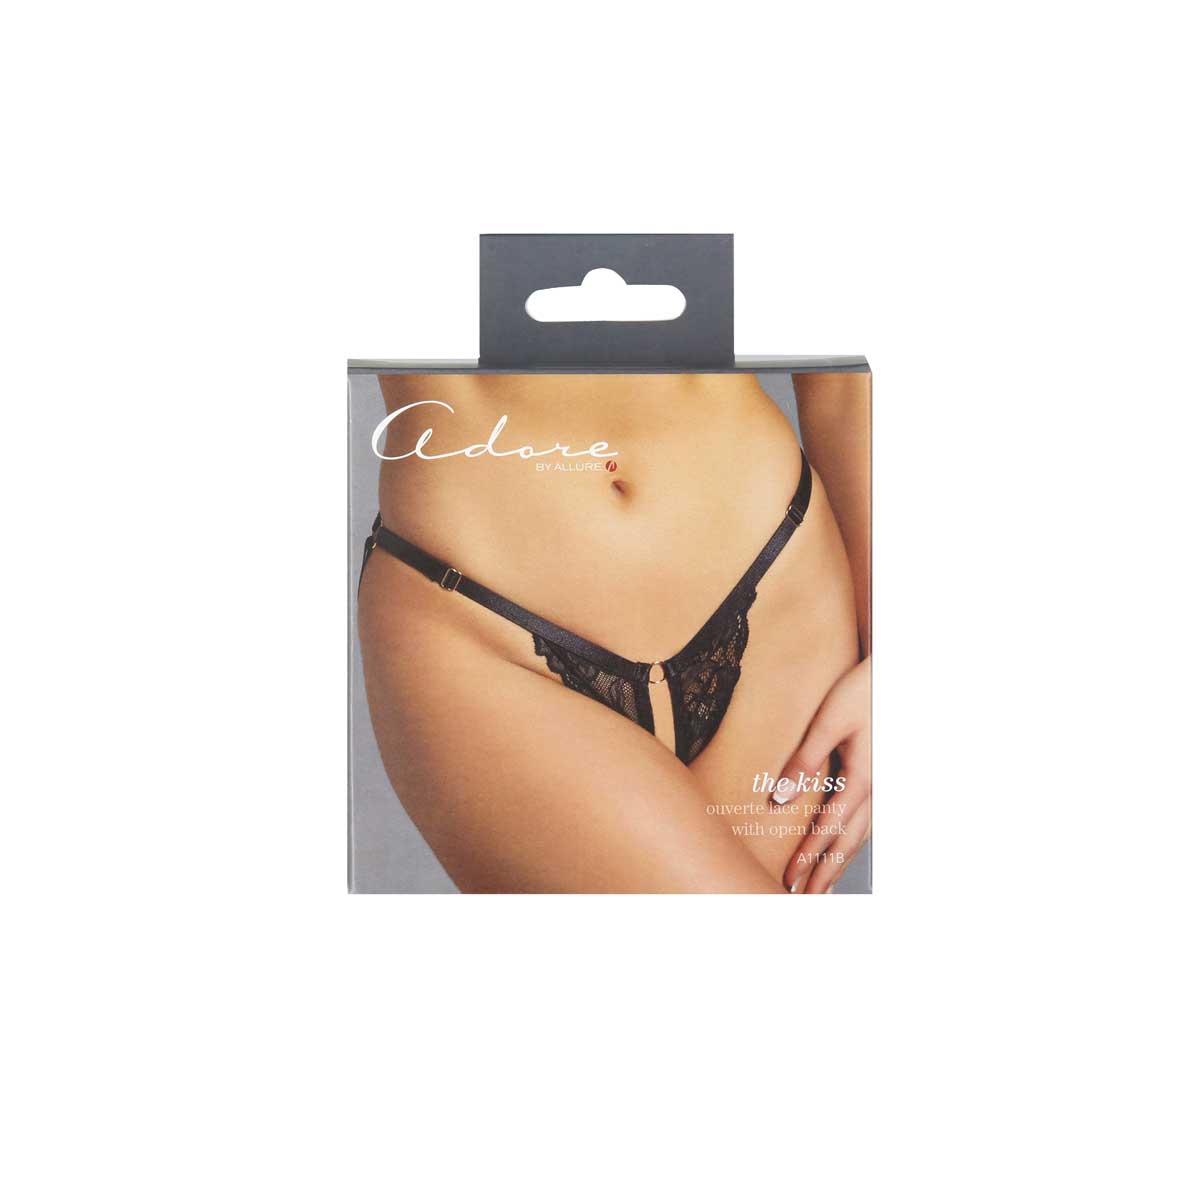 Allure – Adore – The Kiss Panty – Black – One Size